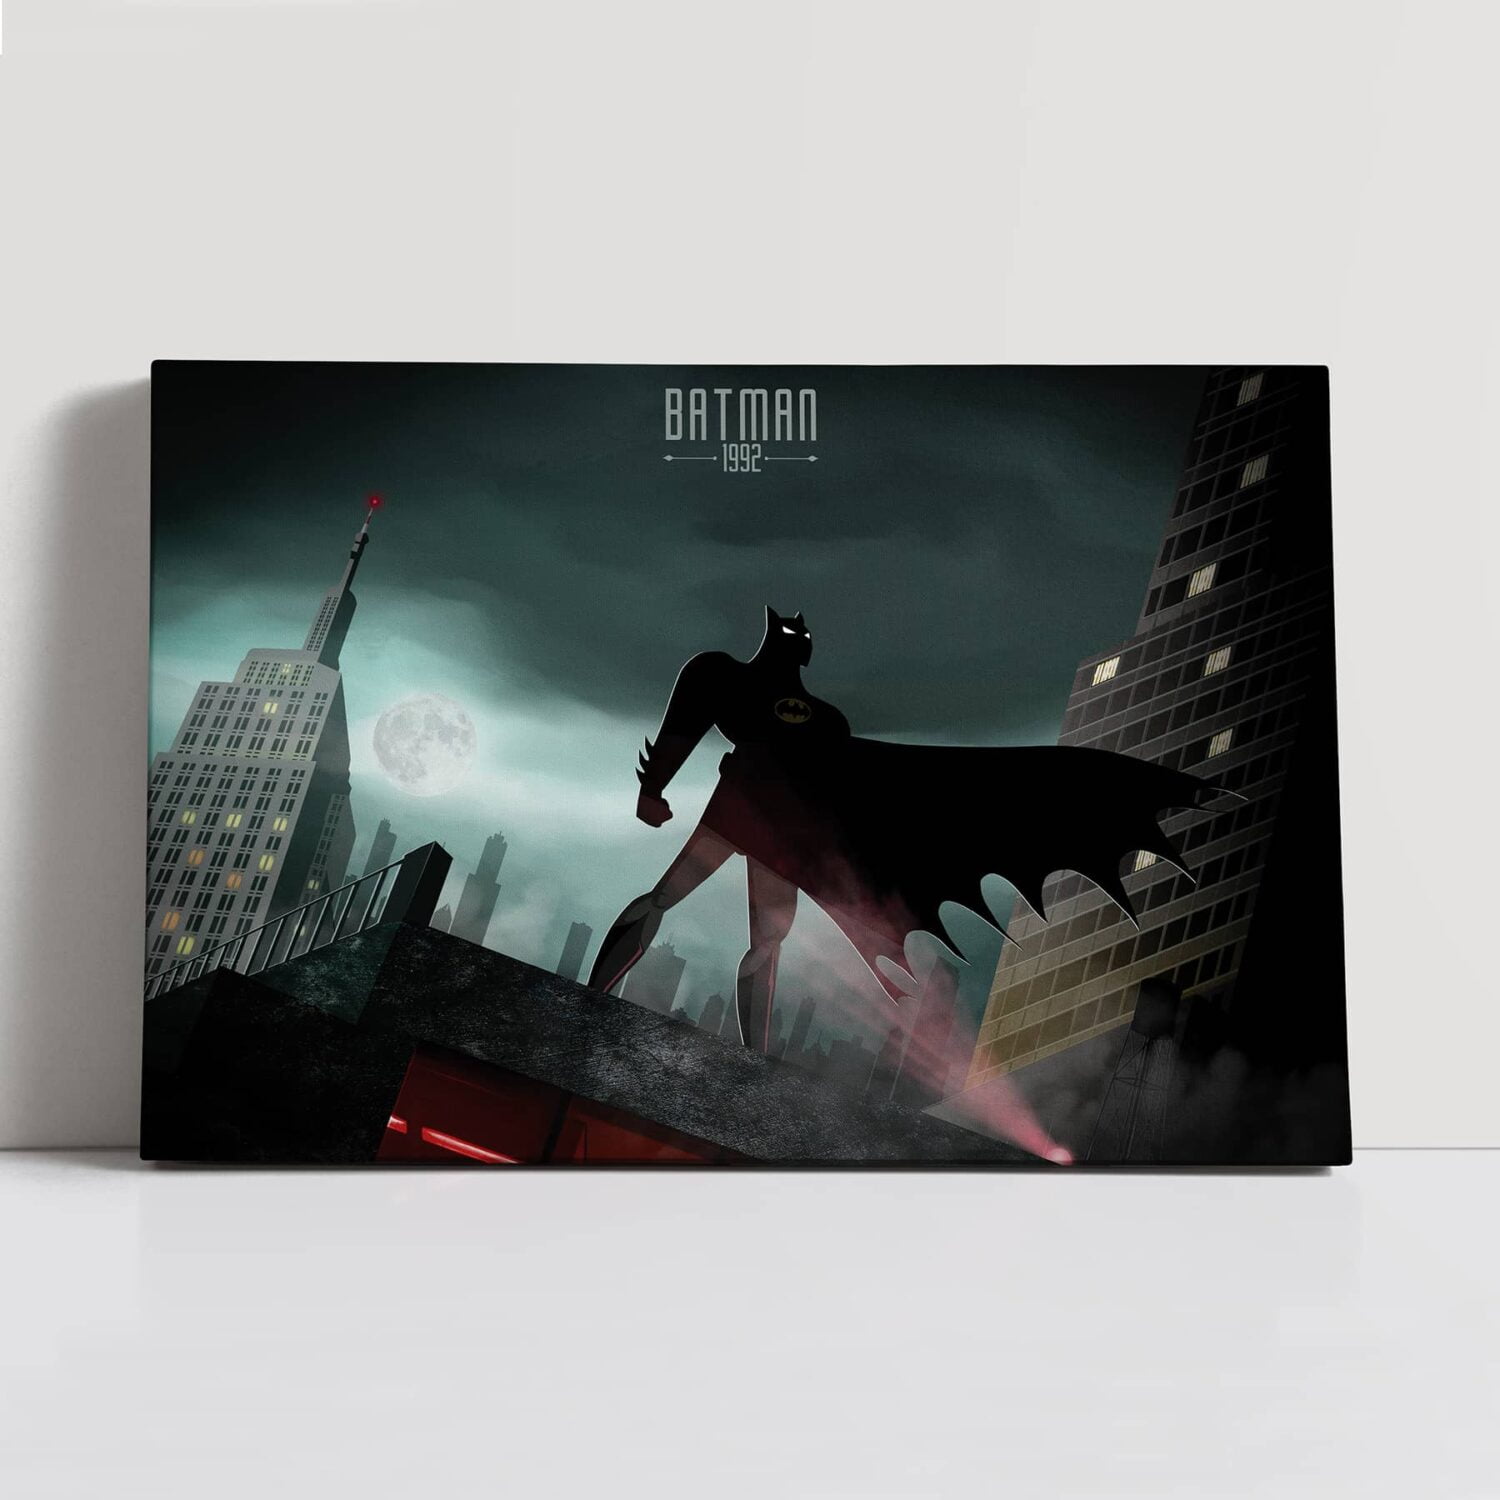 Canvas of Batman from Batman the Animated Series standing on the rooftops